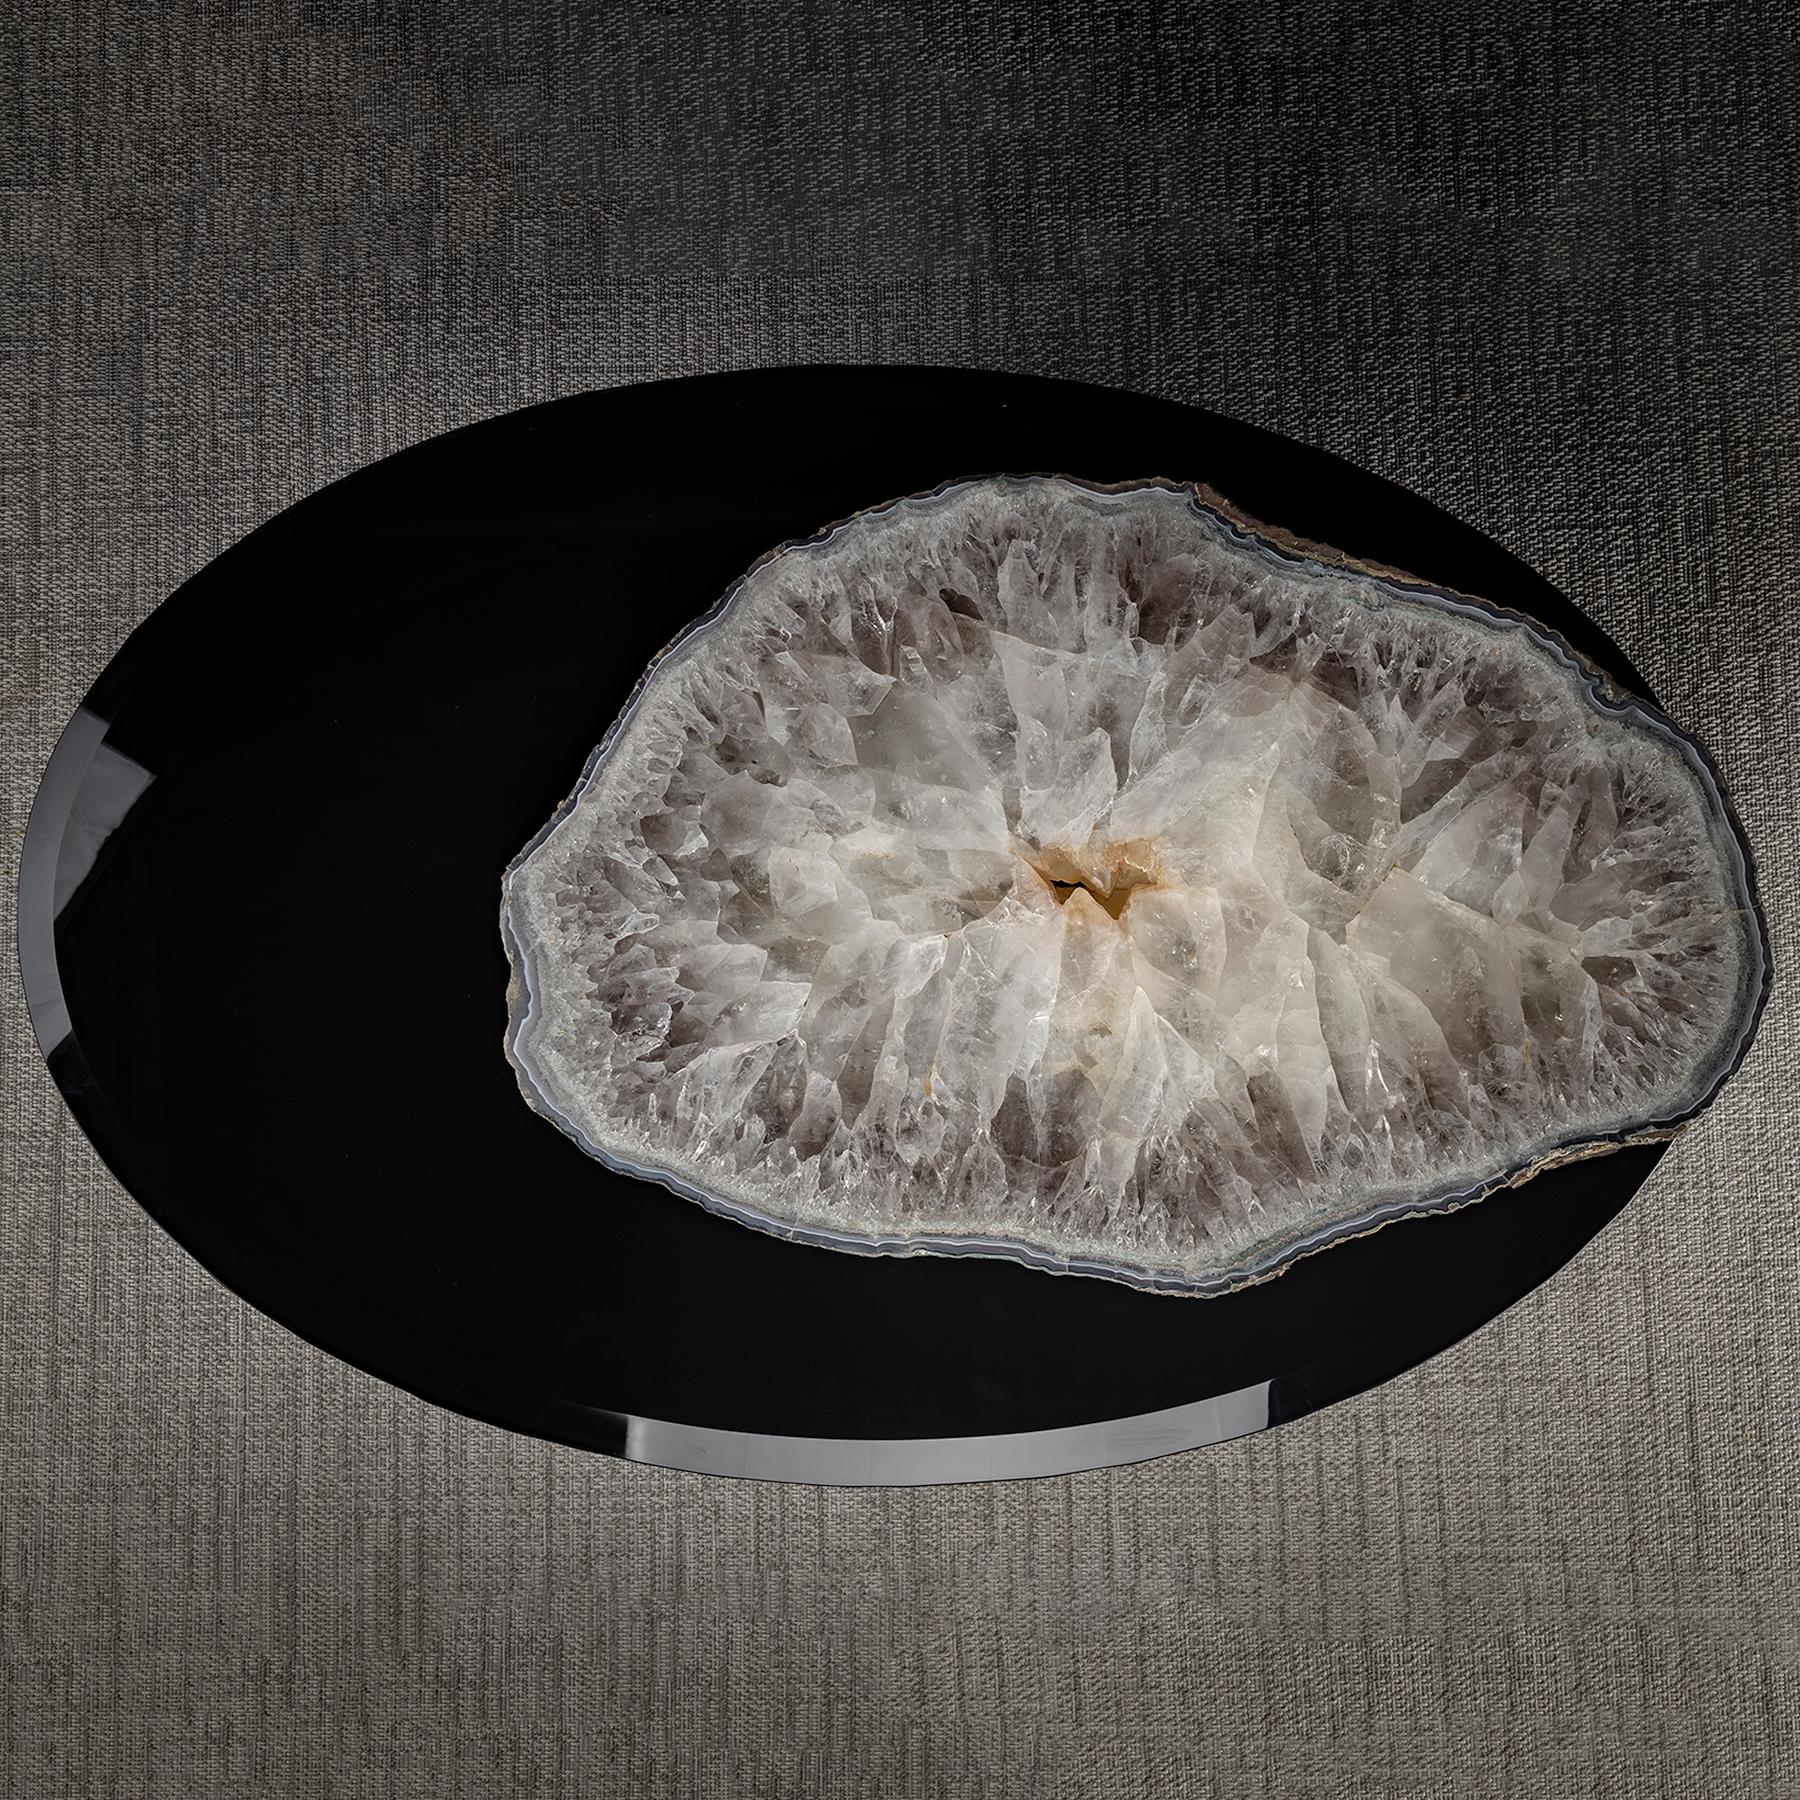 Contemporary Center Table, with Rotating Brazilian Agate on Black Tempered Glass